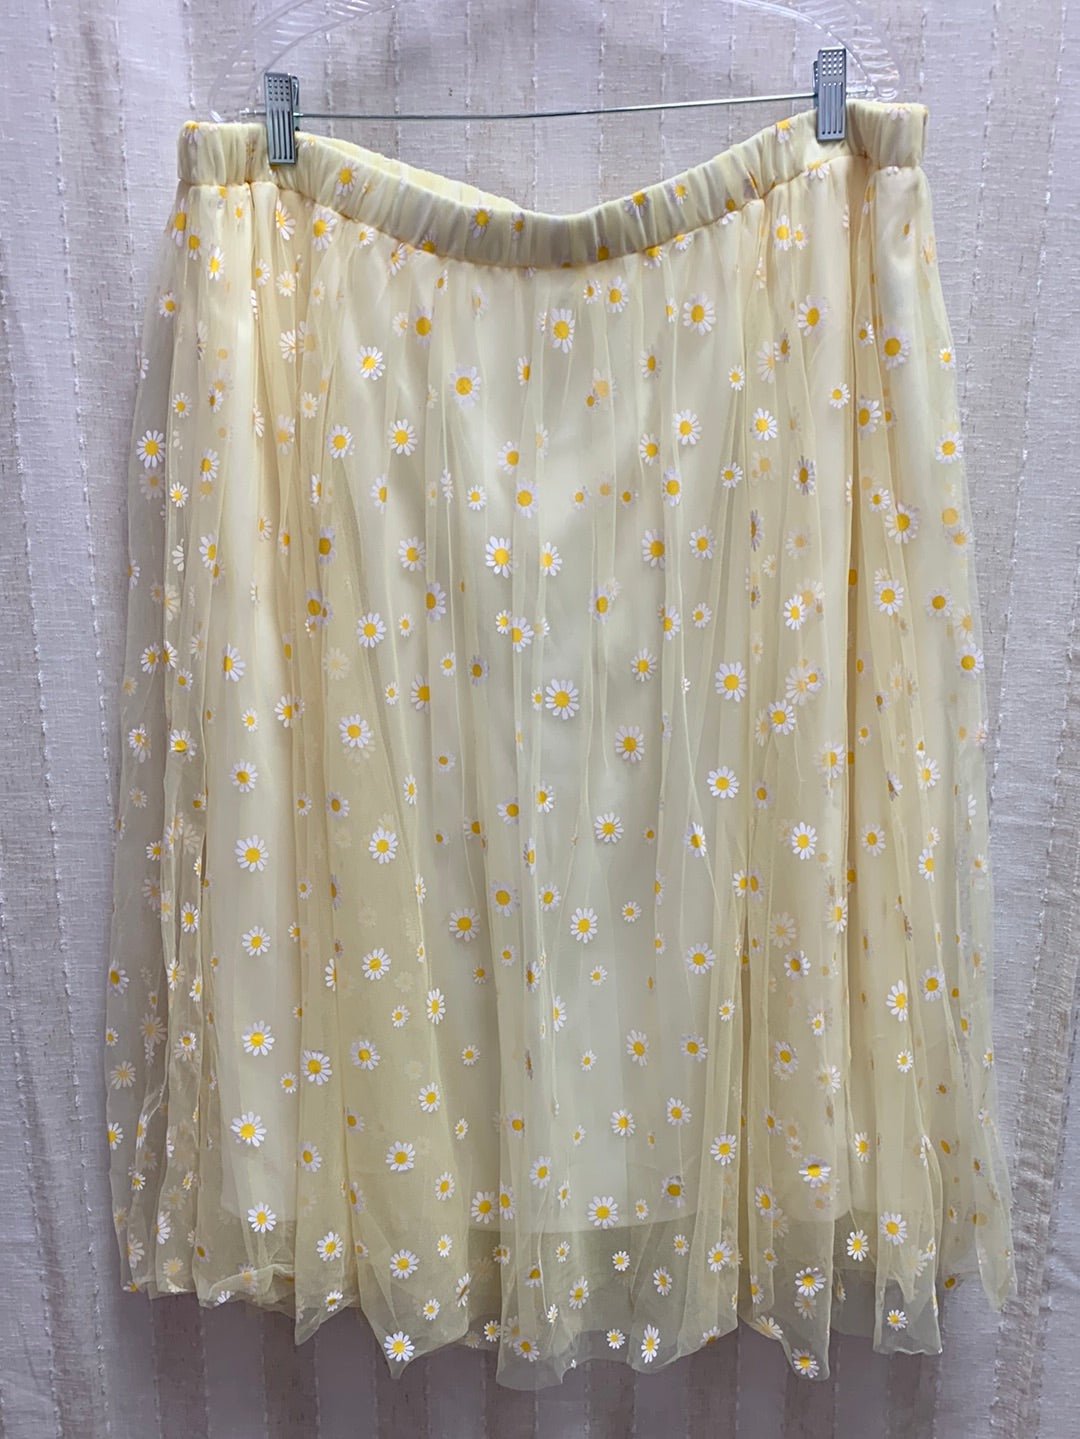 UNIQUE VINTAGE yellow floral Daisy Tulle Skirt - 3X / 20